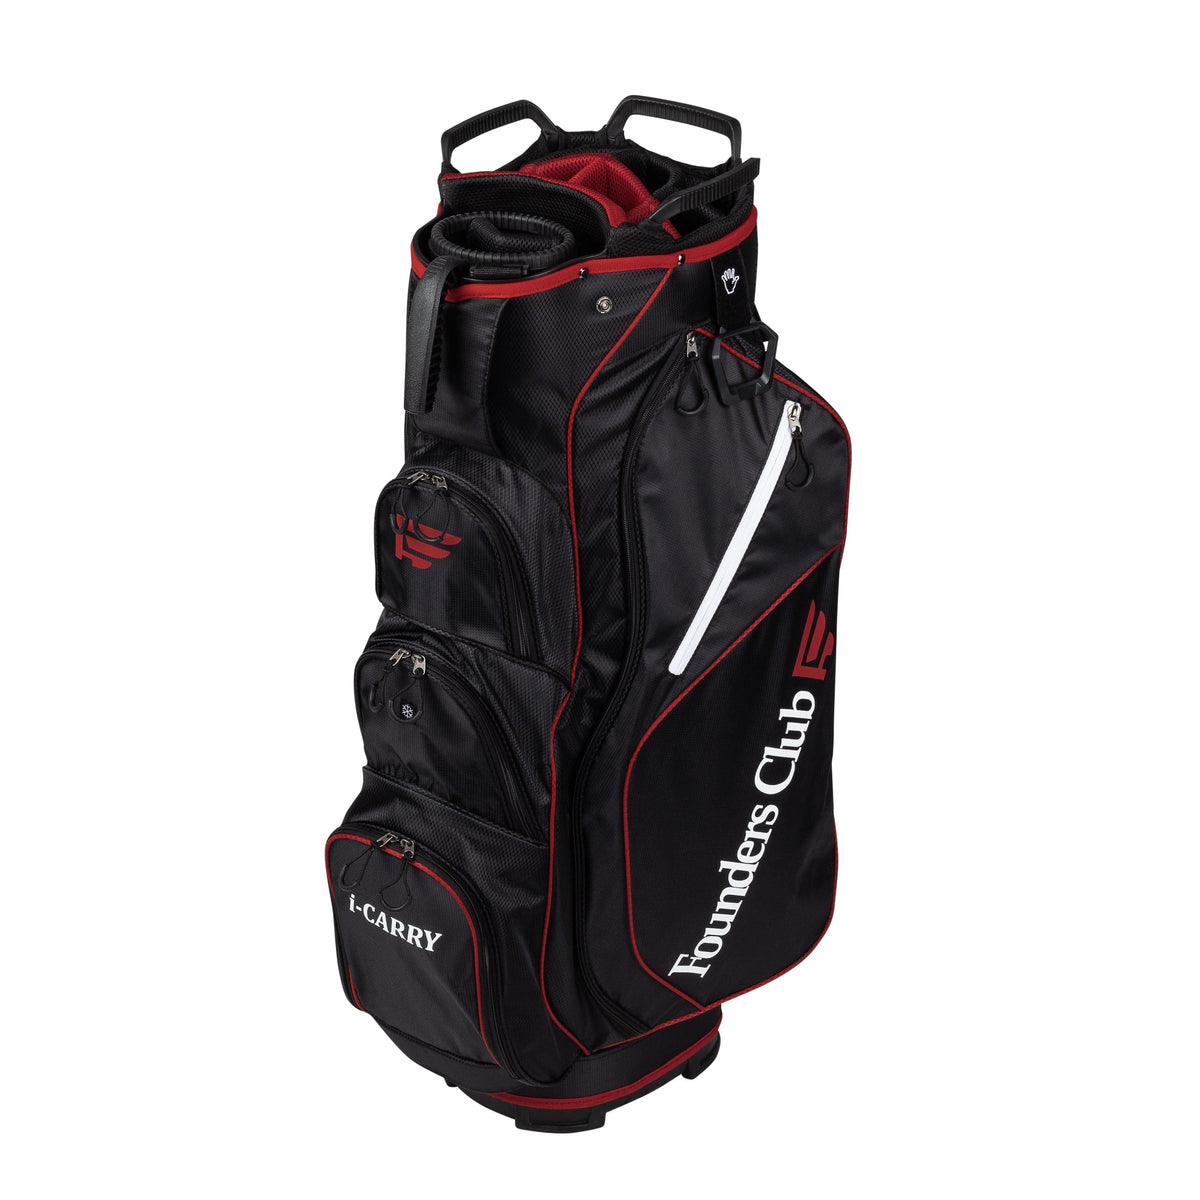 Founders Club Riverdale 2 in 1 Short Game Golf Cart Bag with Removable Short Game Bag